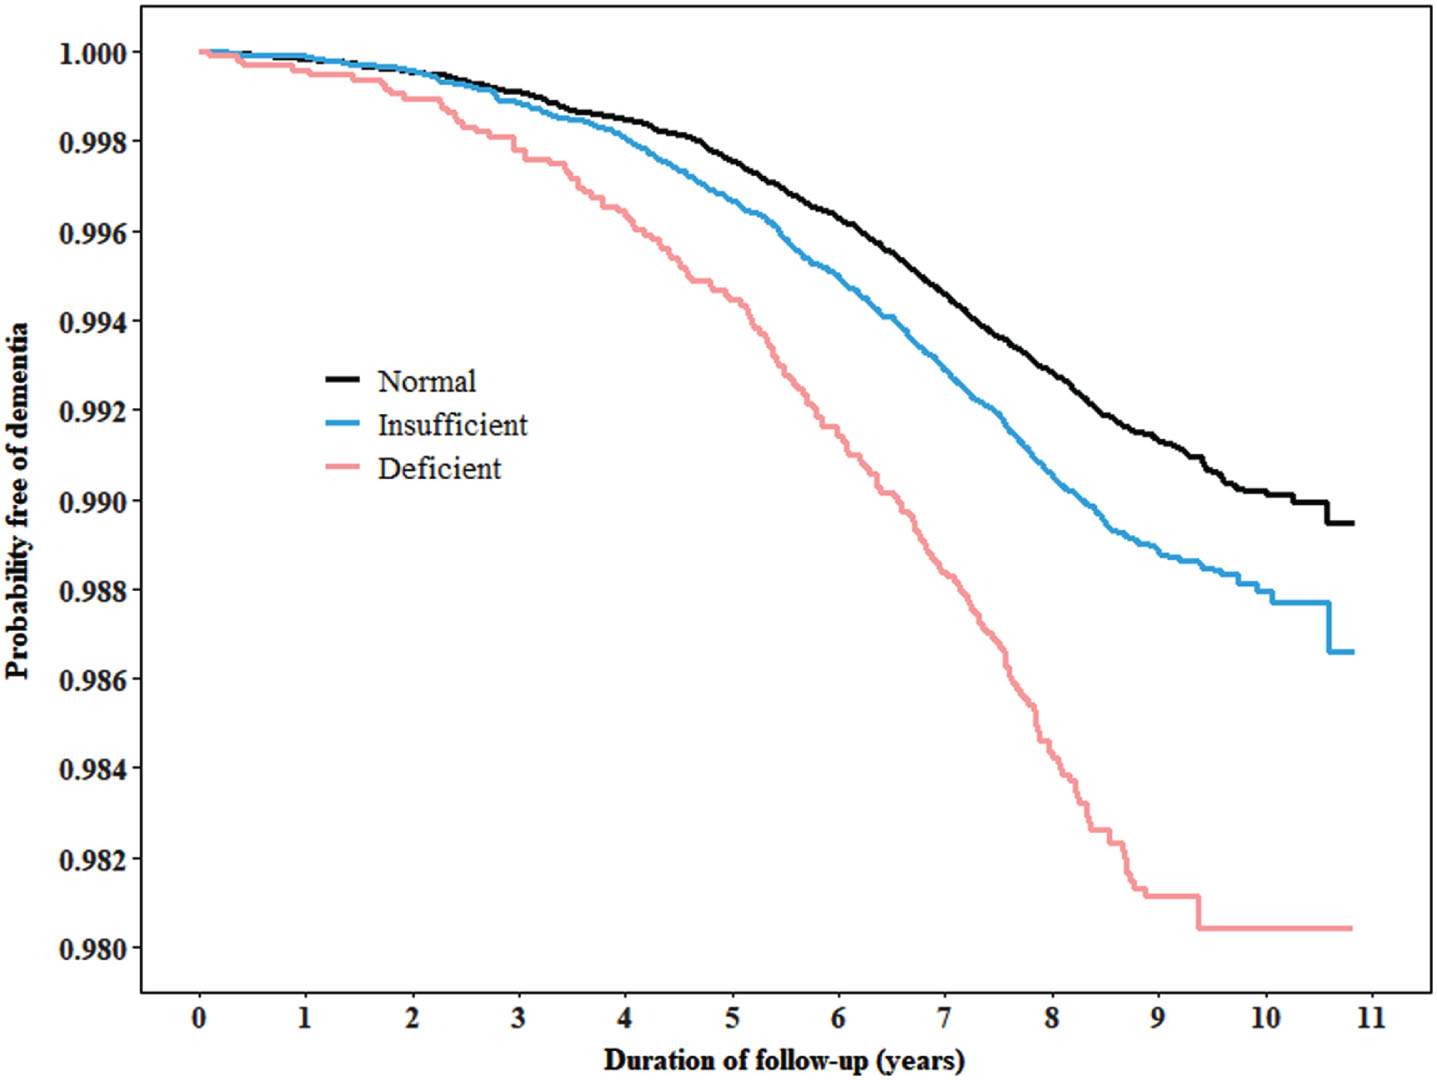 Kaplan-Meier curves for rates of all-cause dementia by 25(OH)D status. The cut-off points for 25(OH)D insufficiency and deficiency were 35.2 nmol/L and 17.8 nmol/L, respectively, for spring, 50.4 nmol/L and 28.0 nmol/L for summer, 46.2 nmol/L and 24.0 nmol/L for autumn, and 33.4 nmol/L and 16.9 nmol/L for winter. The cut-off points were estimated based on the knots generated in Fig. 2.